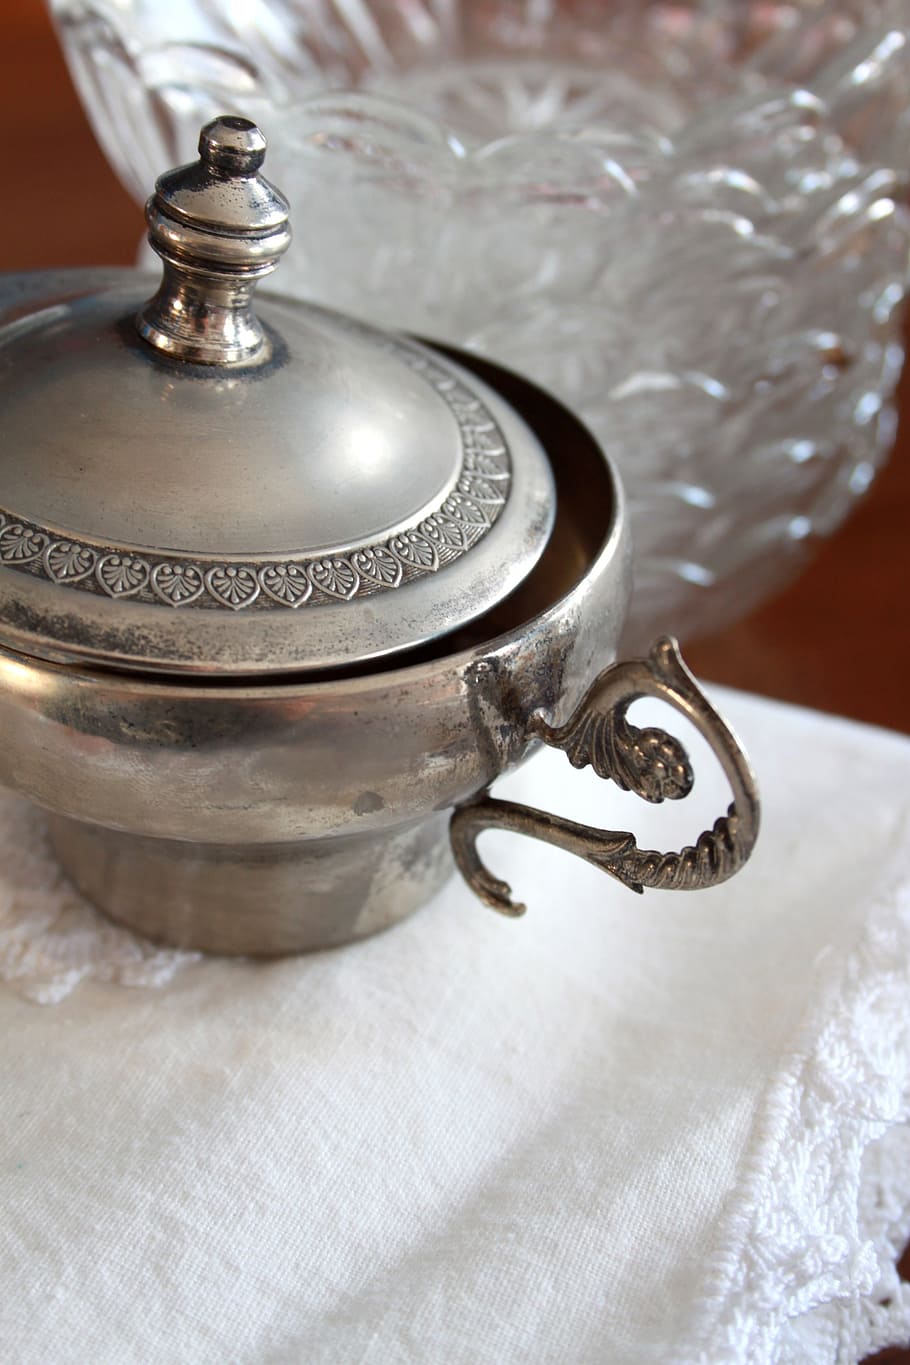 sugar bowl, silver, tableware, pizzo, ancient, vintage, antiquity, kitchen, table, steel